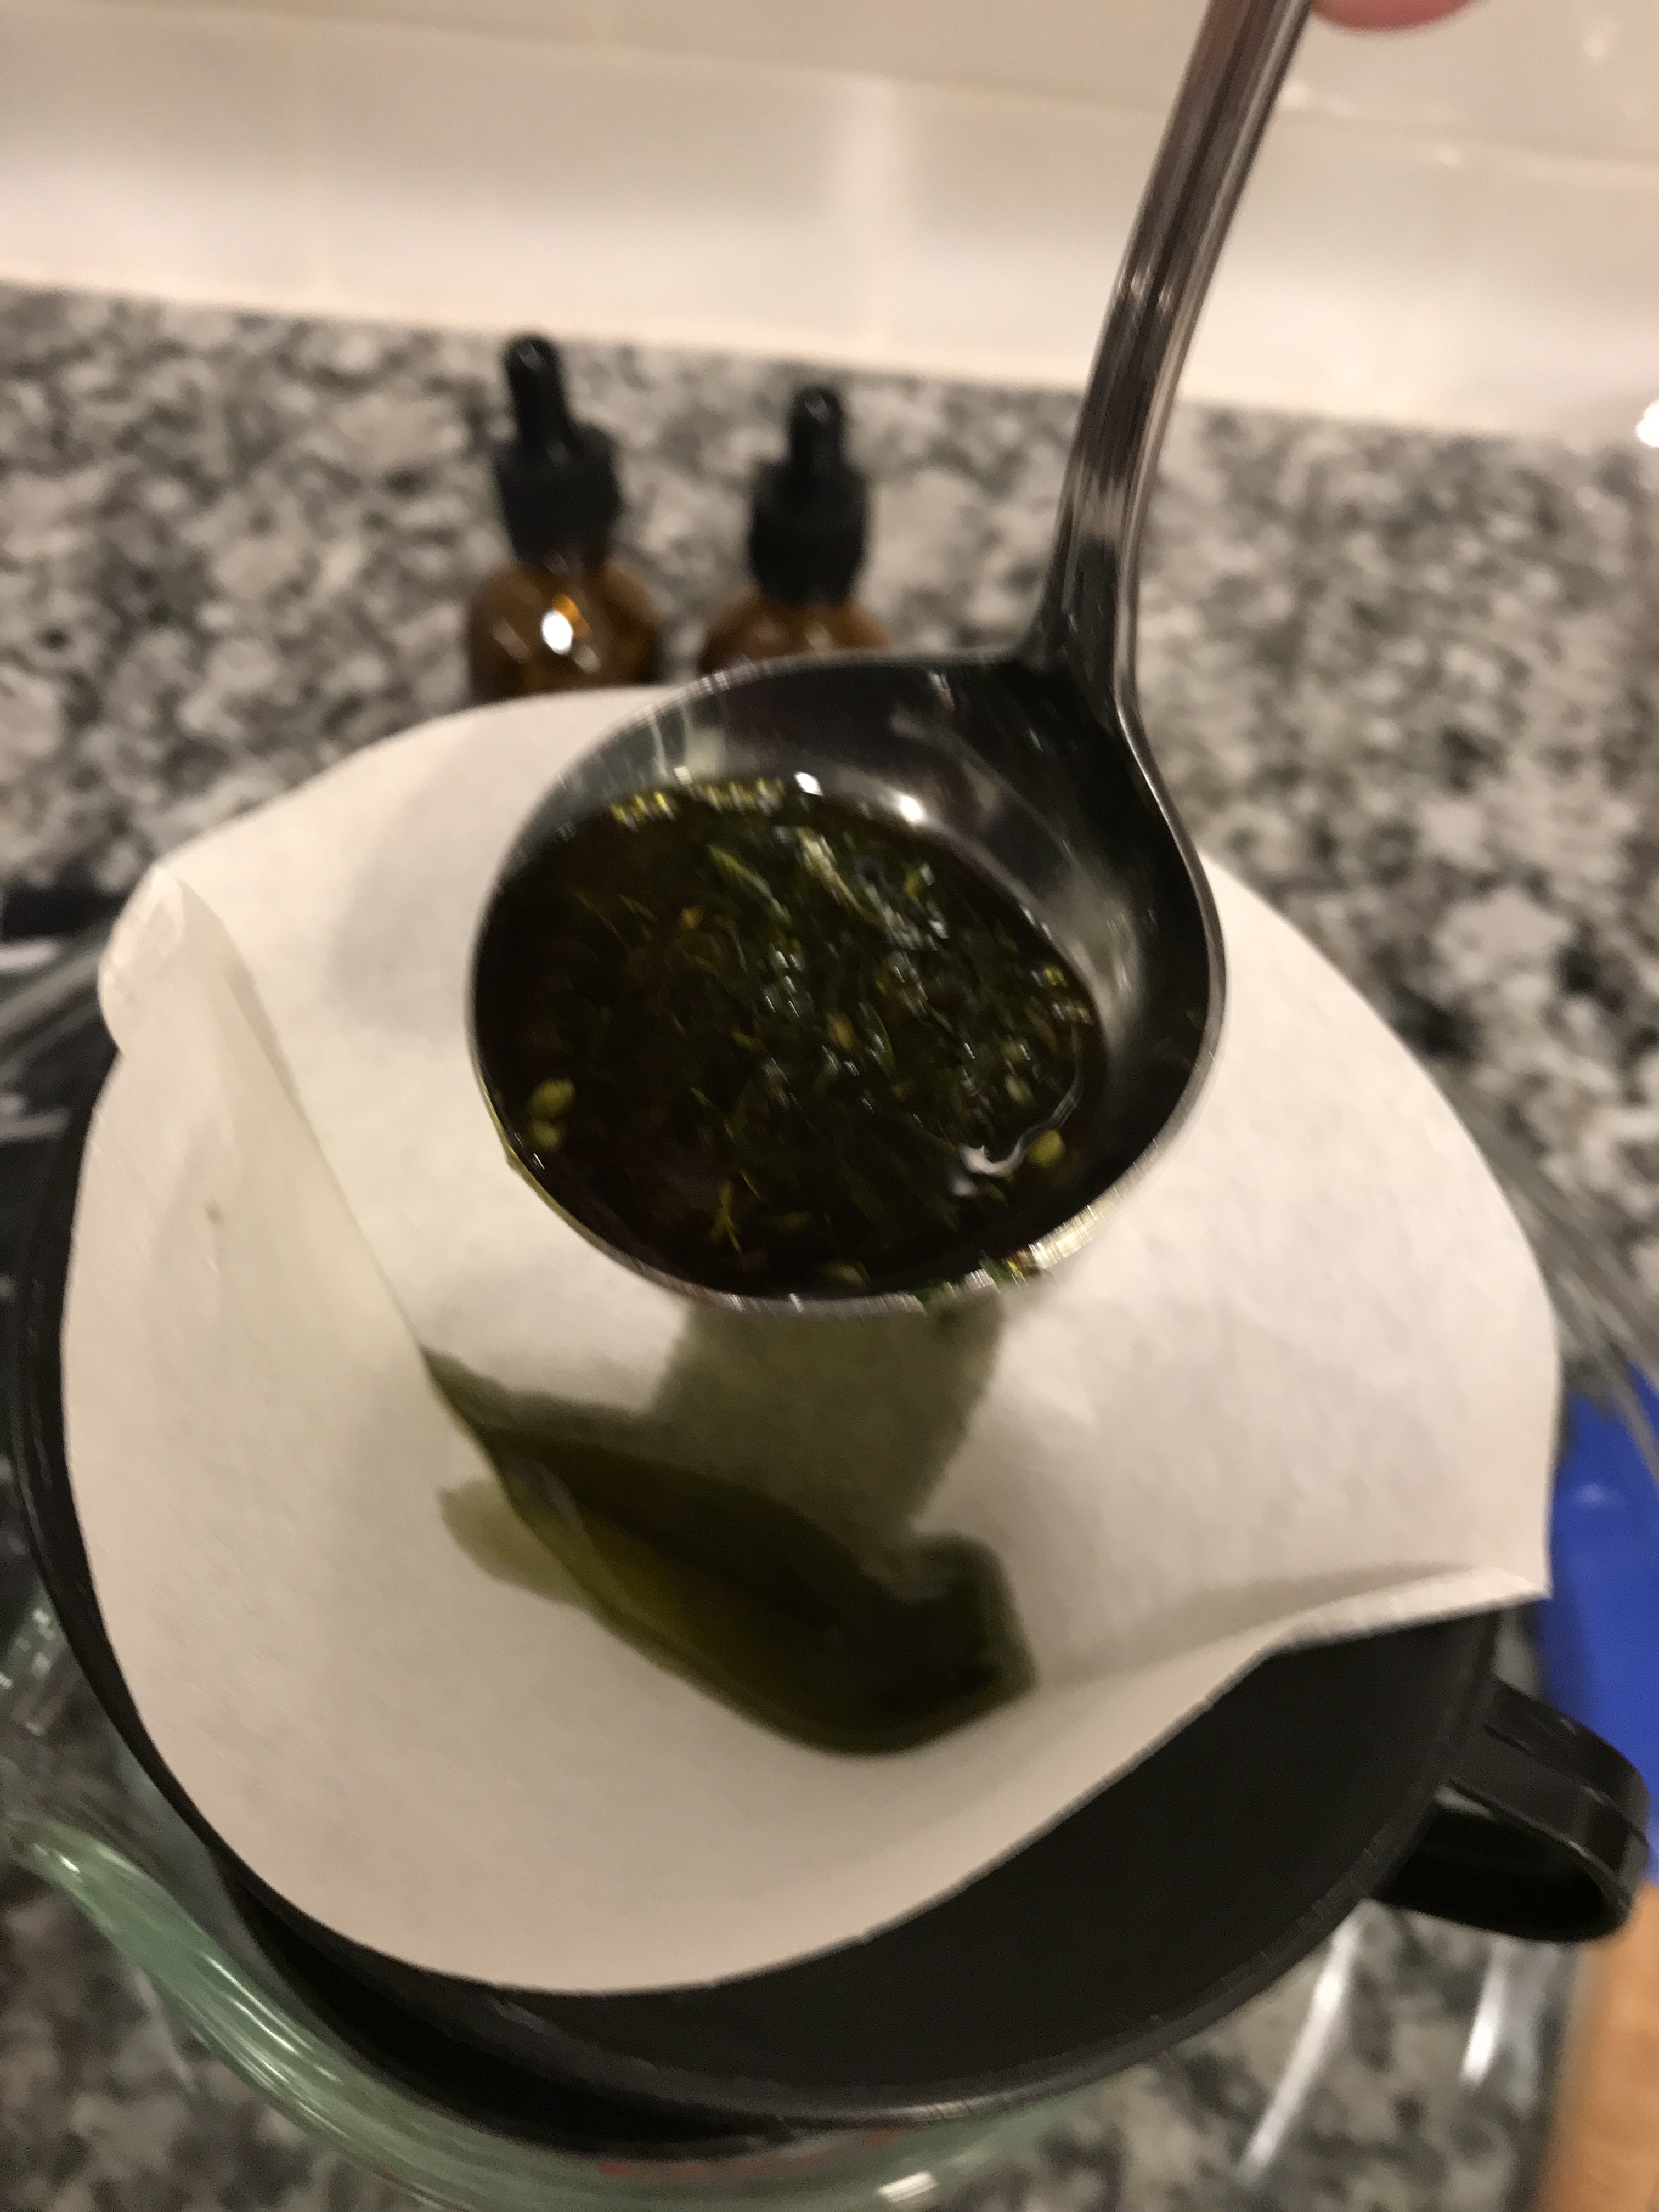 Pour the infused coconut oil through the filter paper. Use a ladle to spoon the cannabis and coconut oil through the filter, if your crockpot is too heavy to hold.